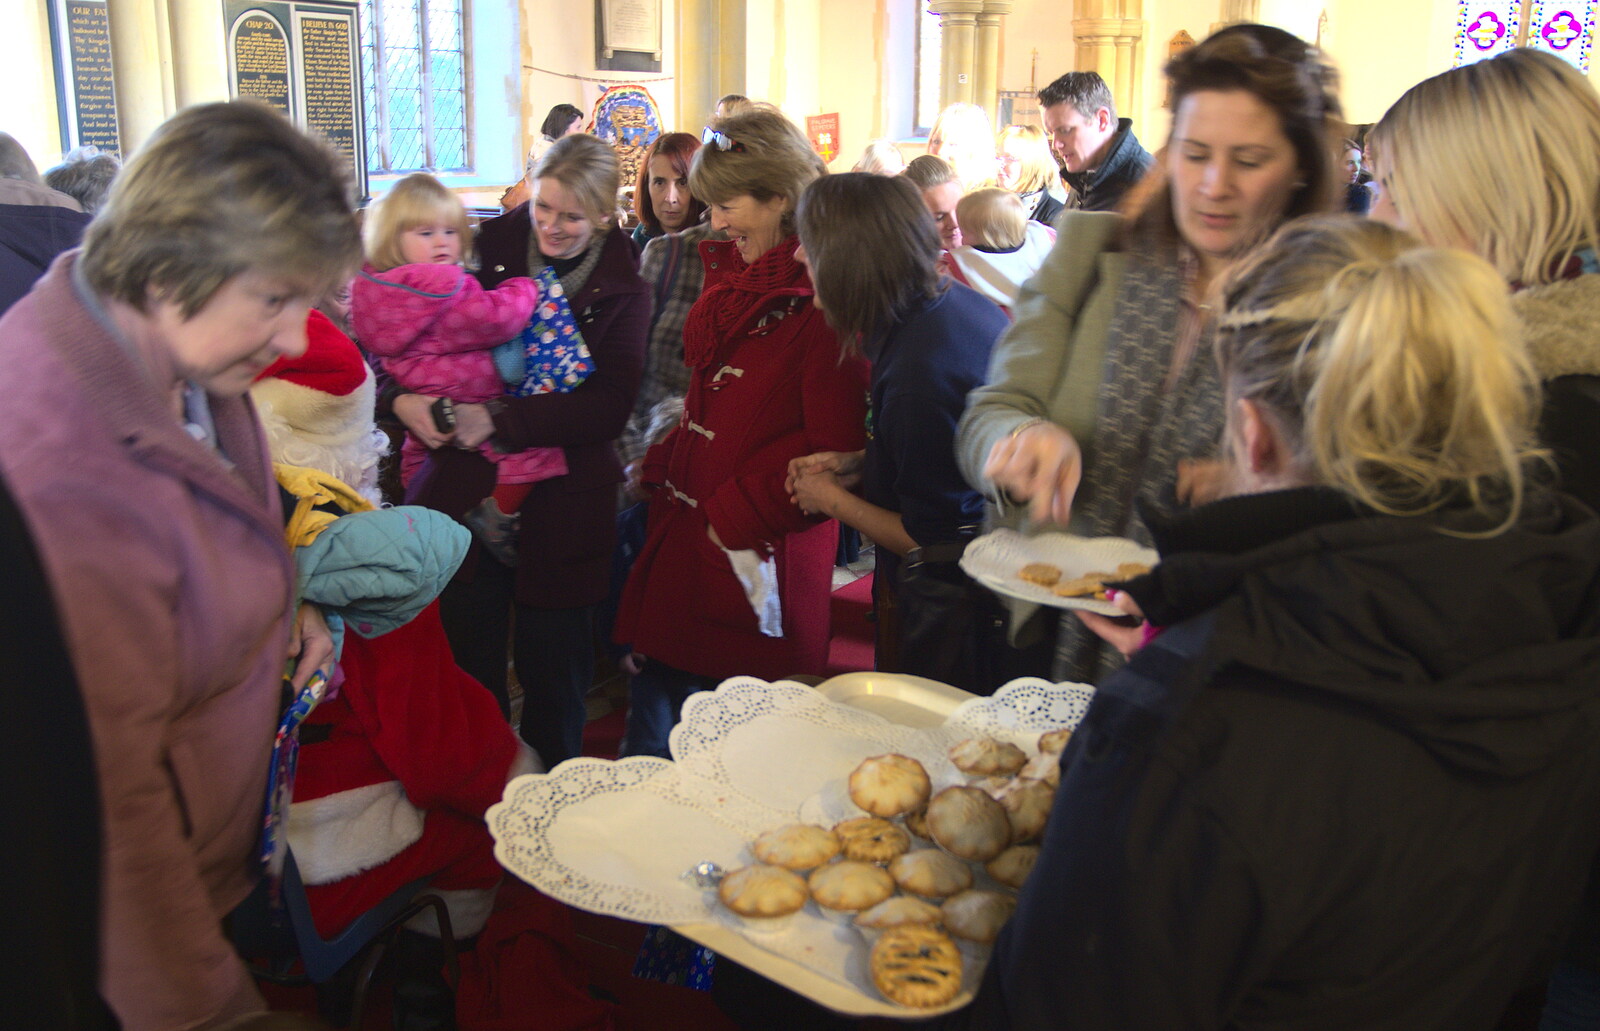 Mince pies are handed around from Fred's Nursery Nativity, Palgrave, Suffolk - 13th December 2012